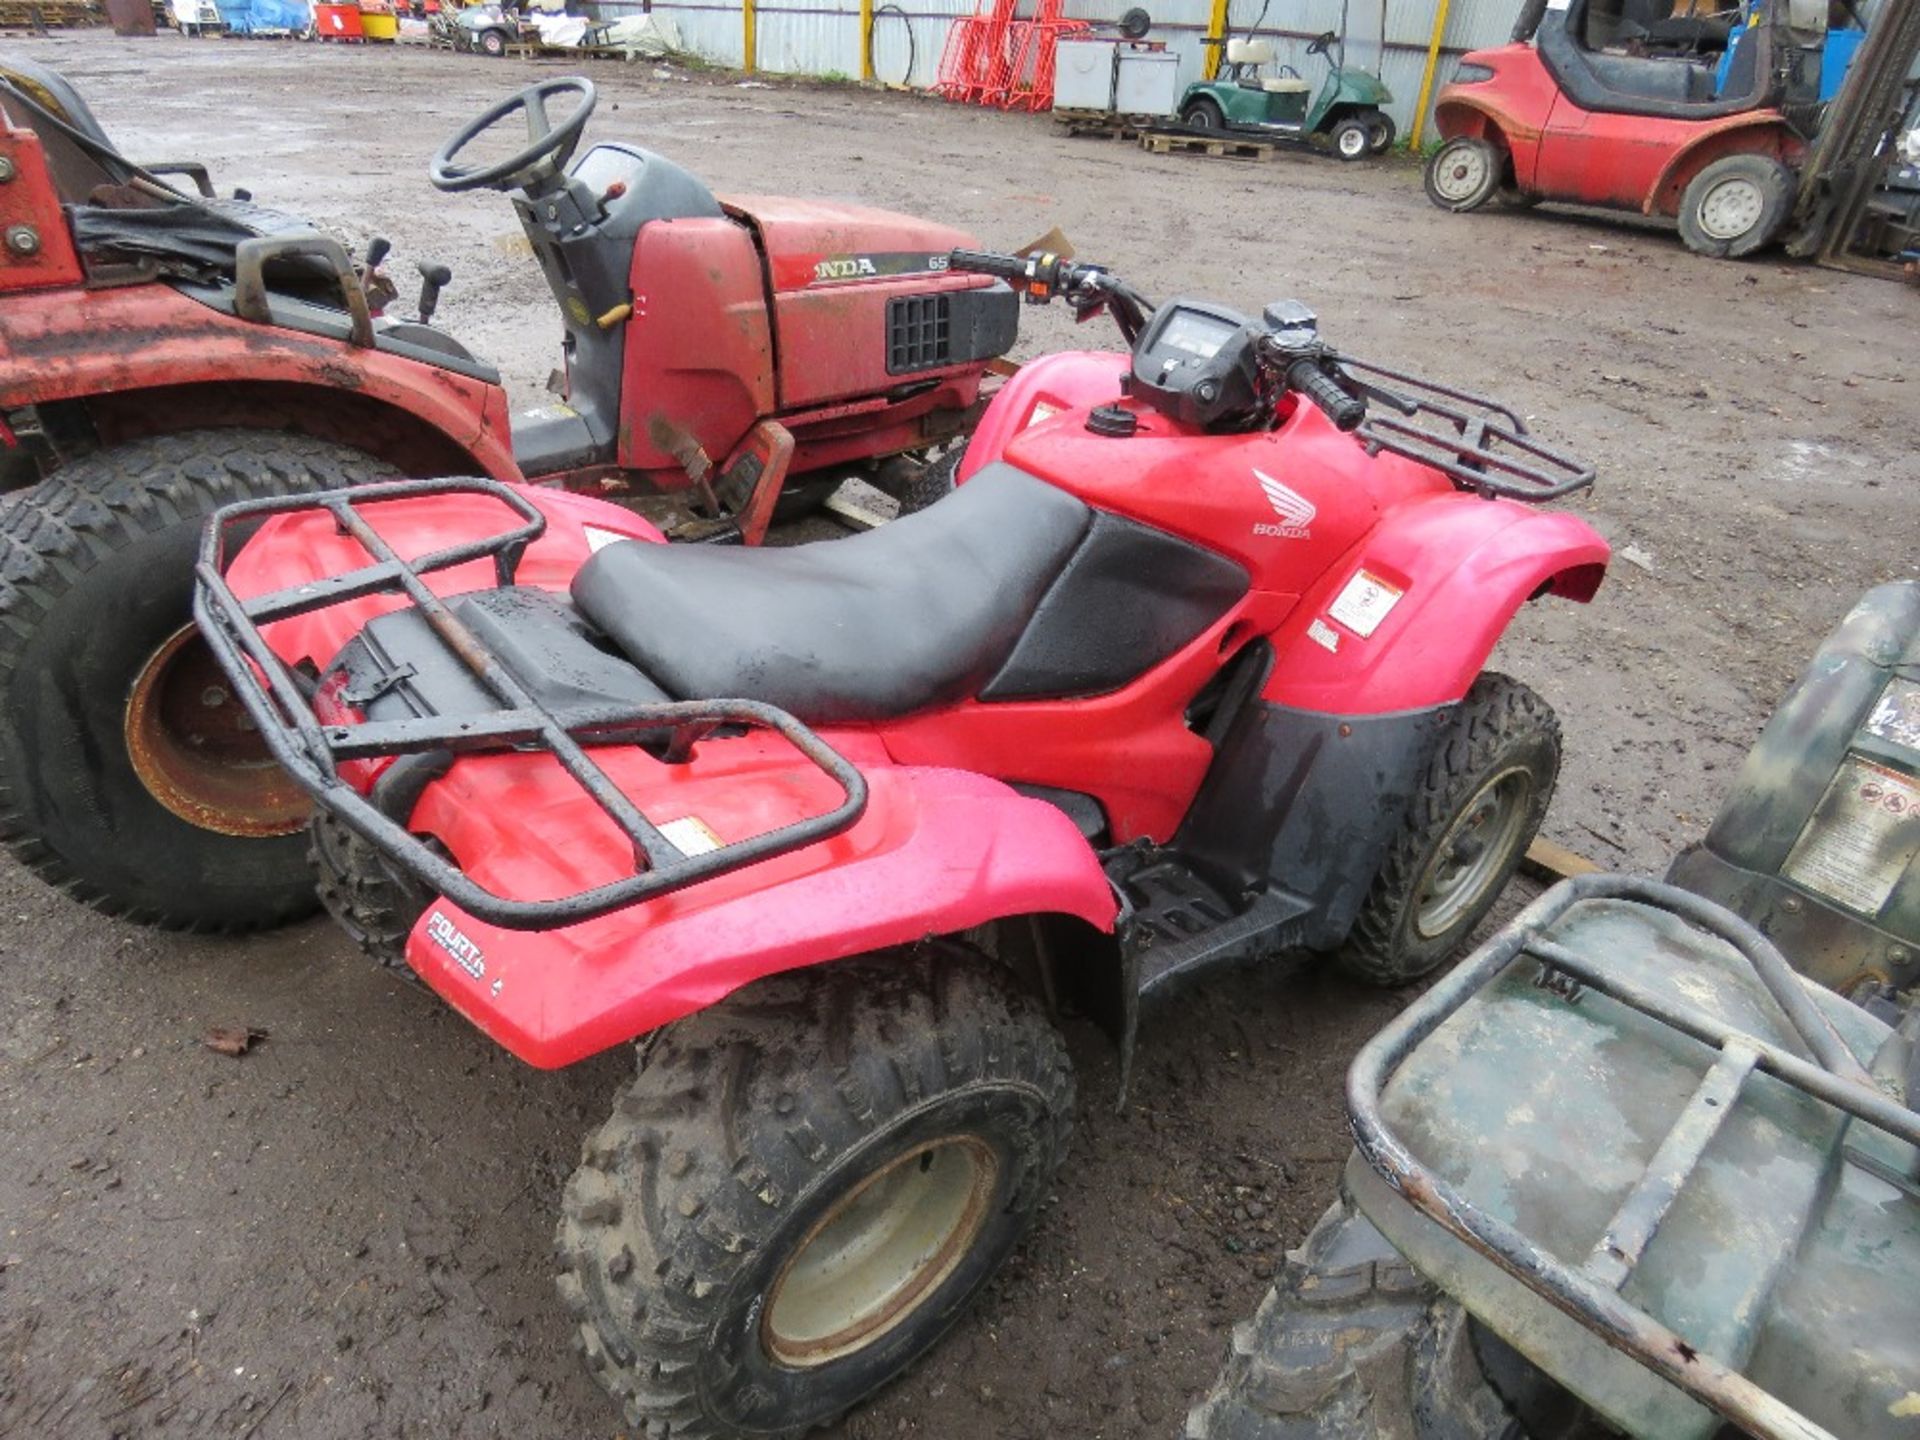 HONDA FOURTRAK 400 QUAD BIKE, YEAR 2003 APPROX. WHEN TESTED WAS SEEN TO RUN, DRIVE AND BRAKE. - Image 4 of 5